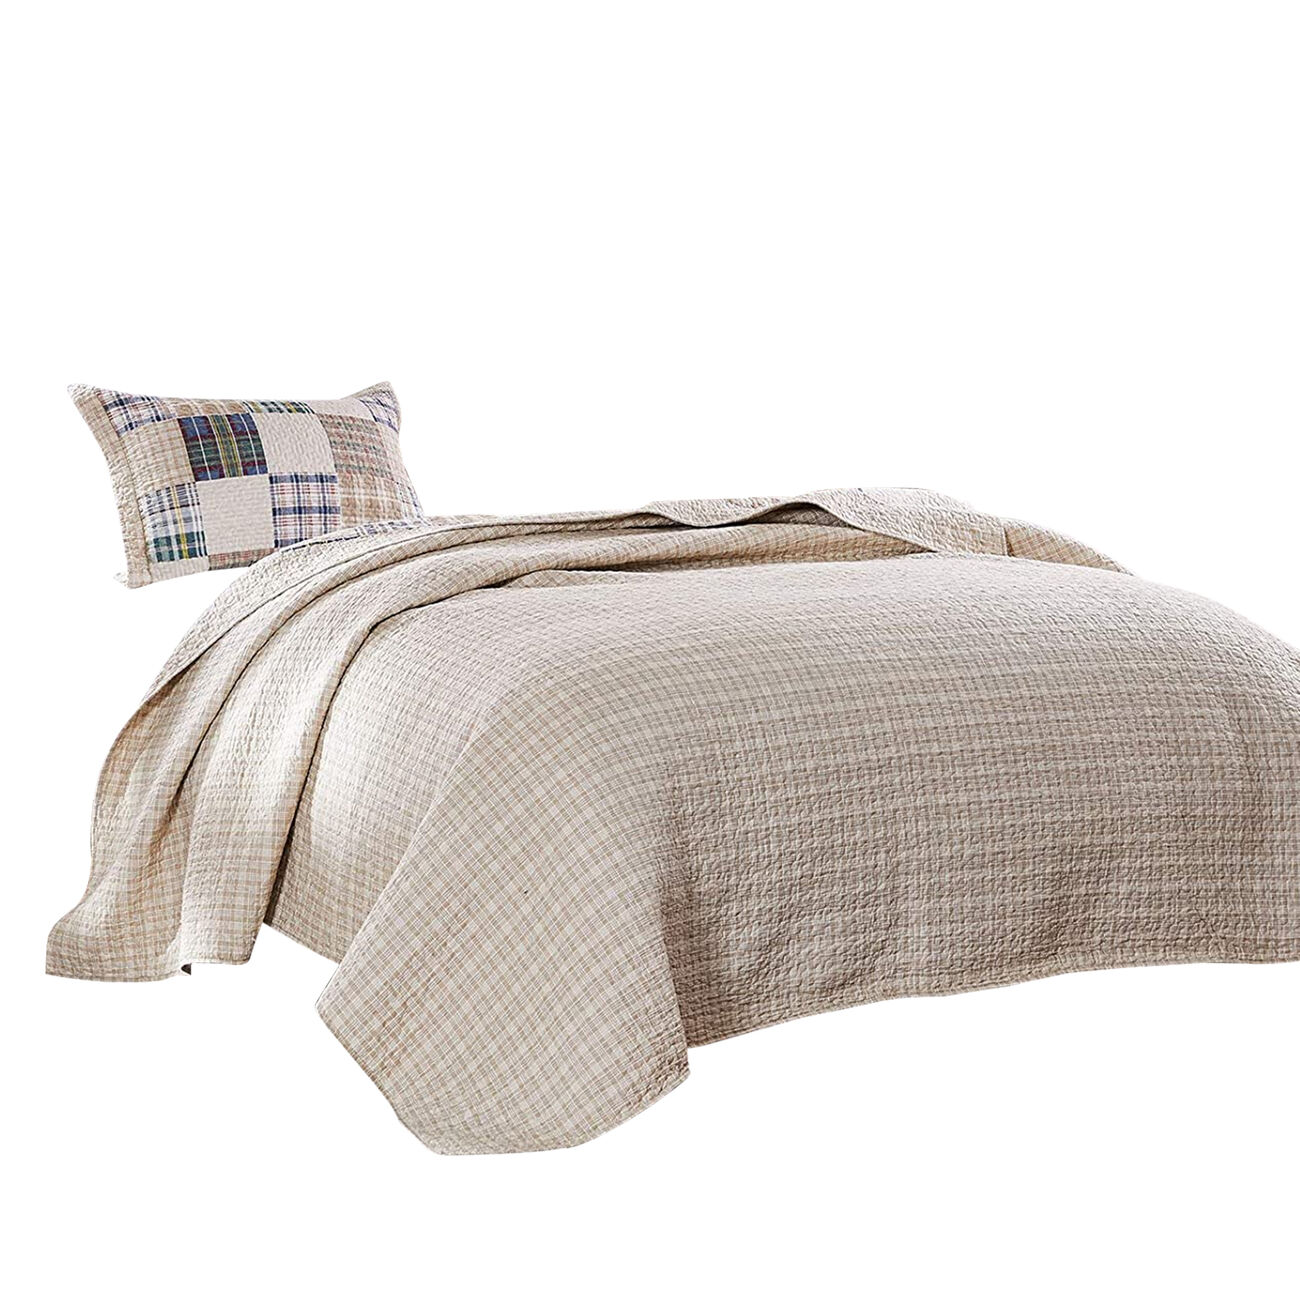 Ebro 2 Piece Twin Size Quilt Set with Plaids Square and Stripes Pattern, Cream